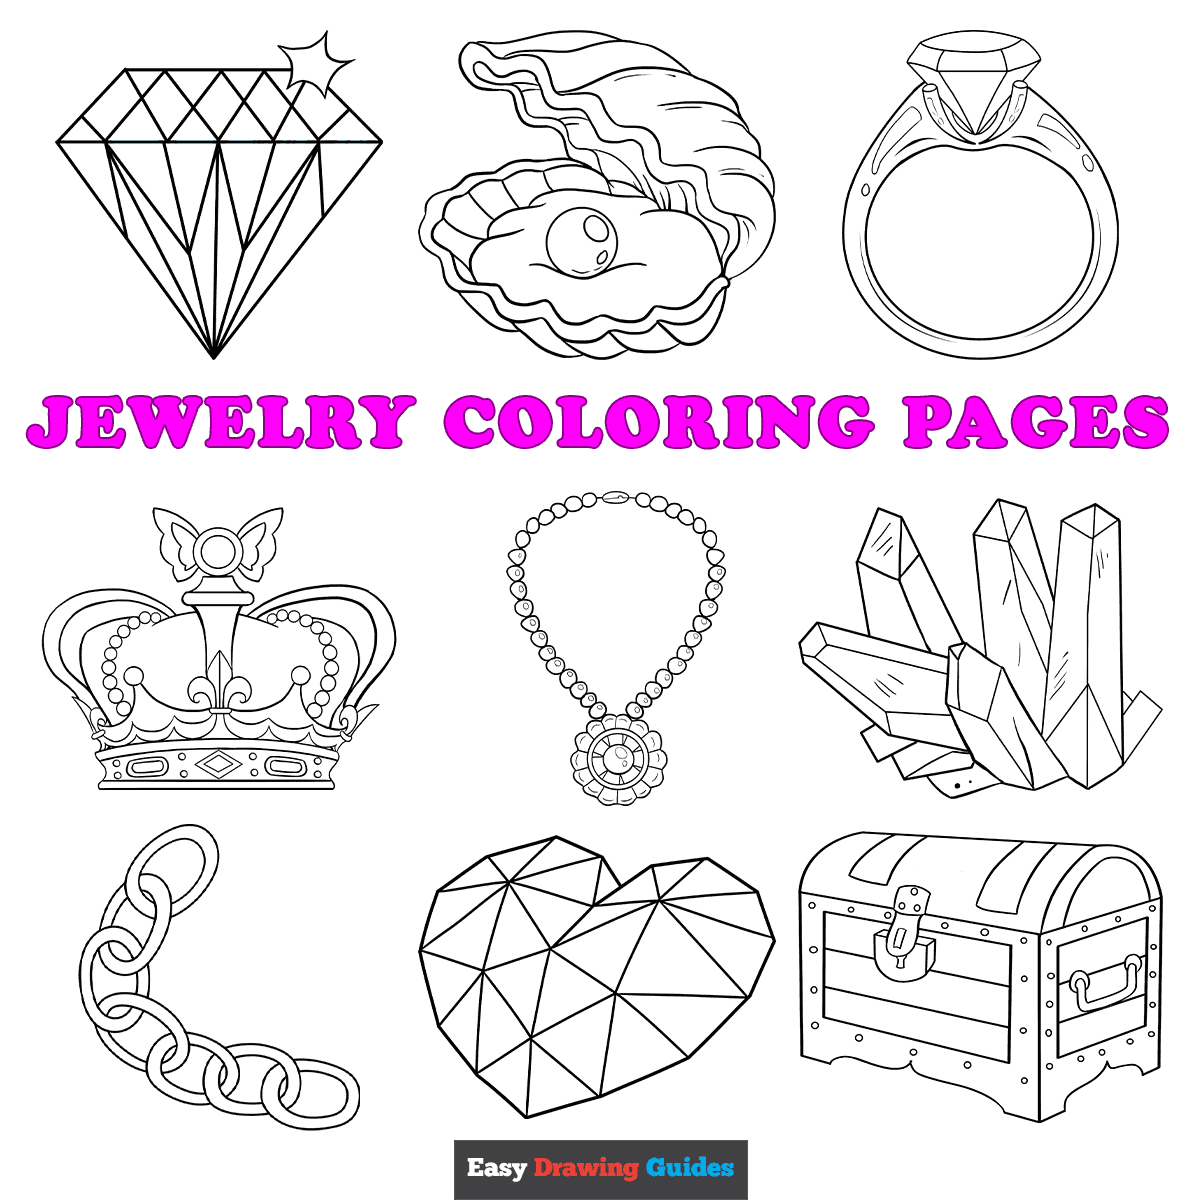 Free printable jewelry coloring pages for kids